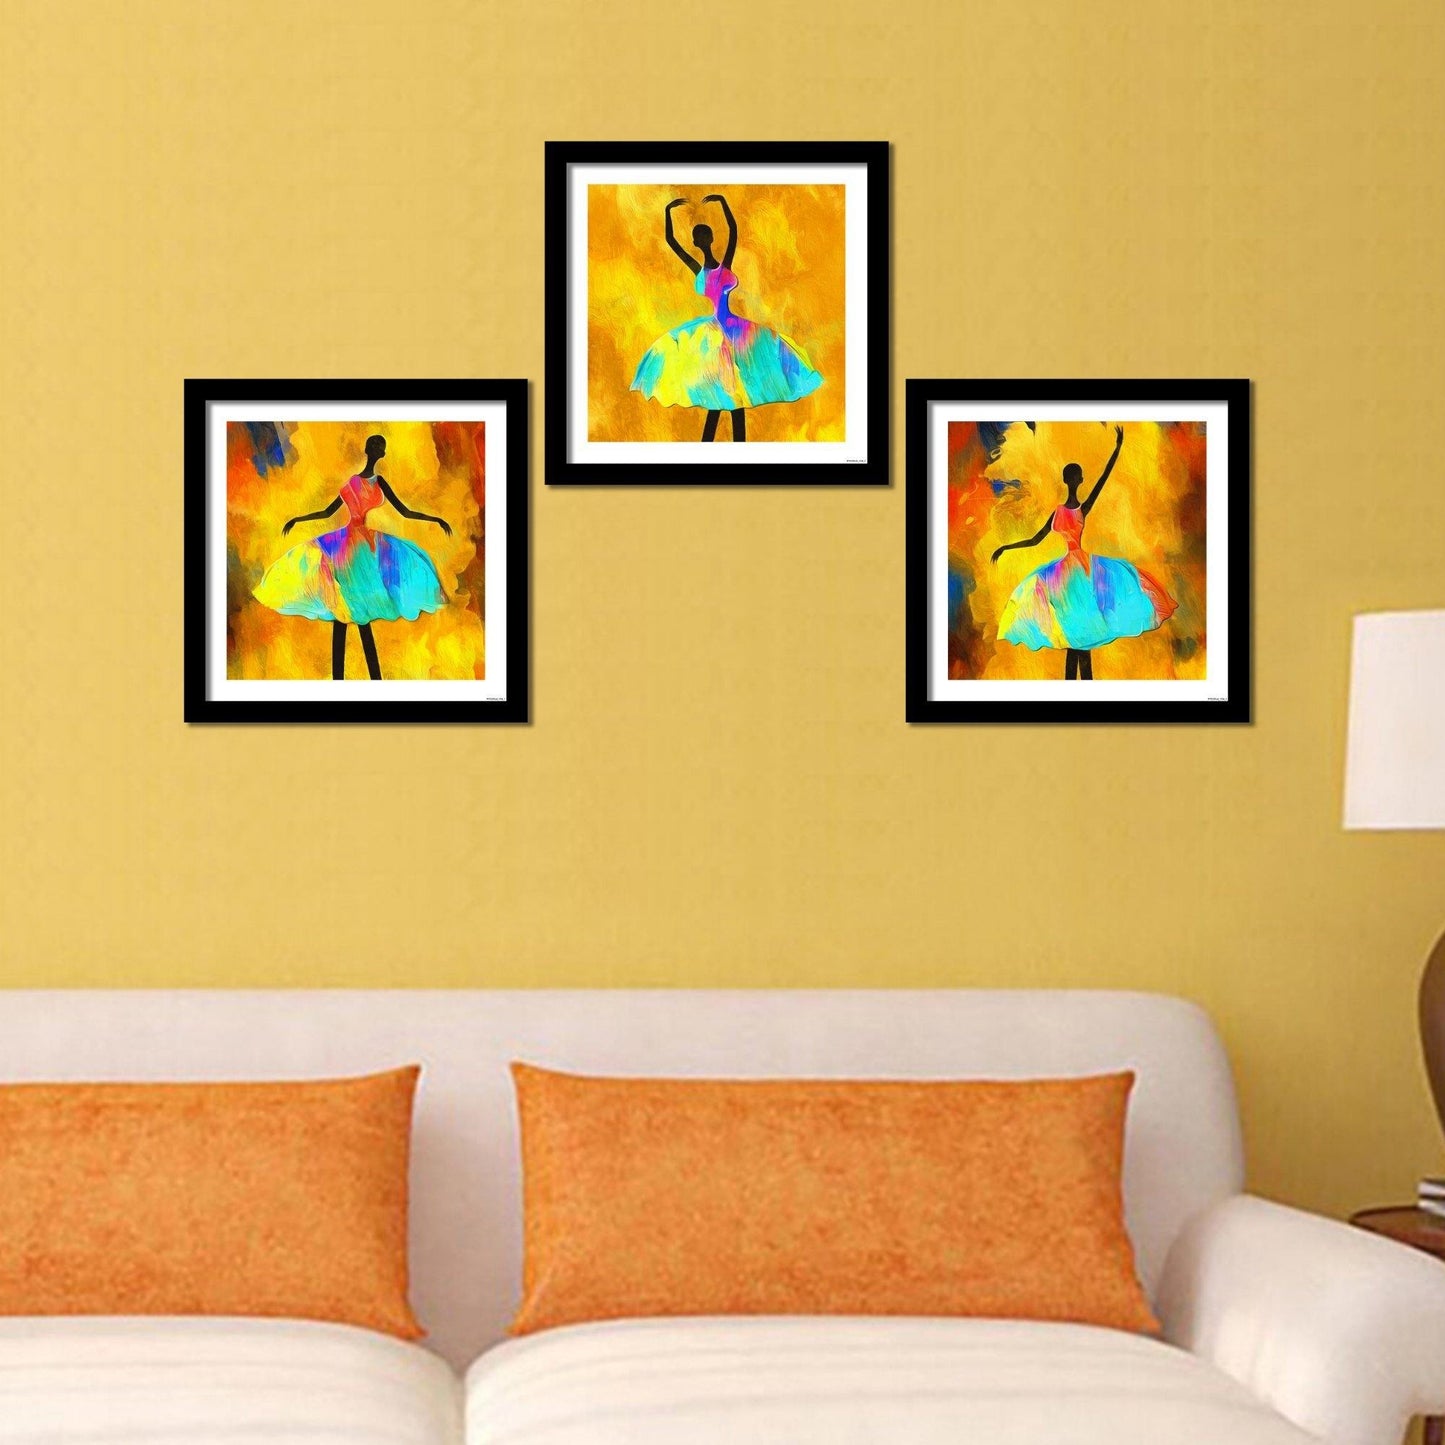 3 Pieces Quality Wall Frame of African Girl Ballerina Dancing